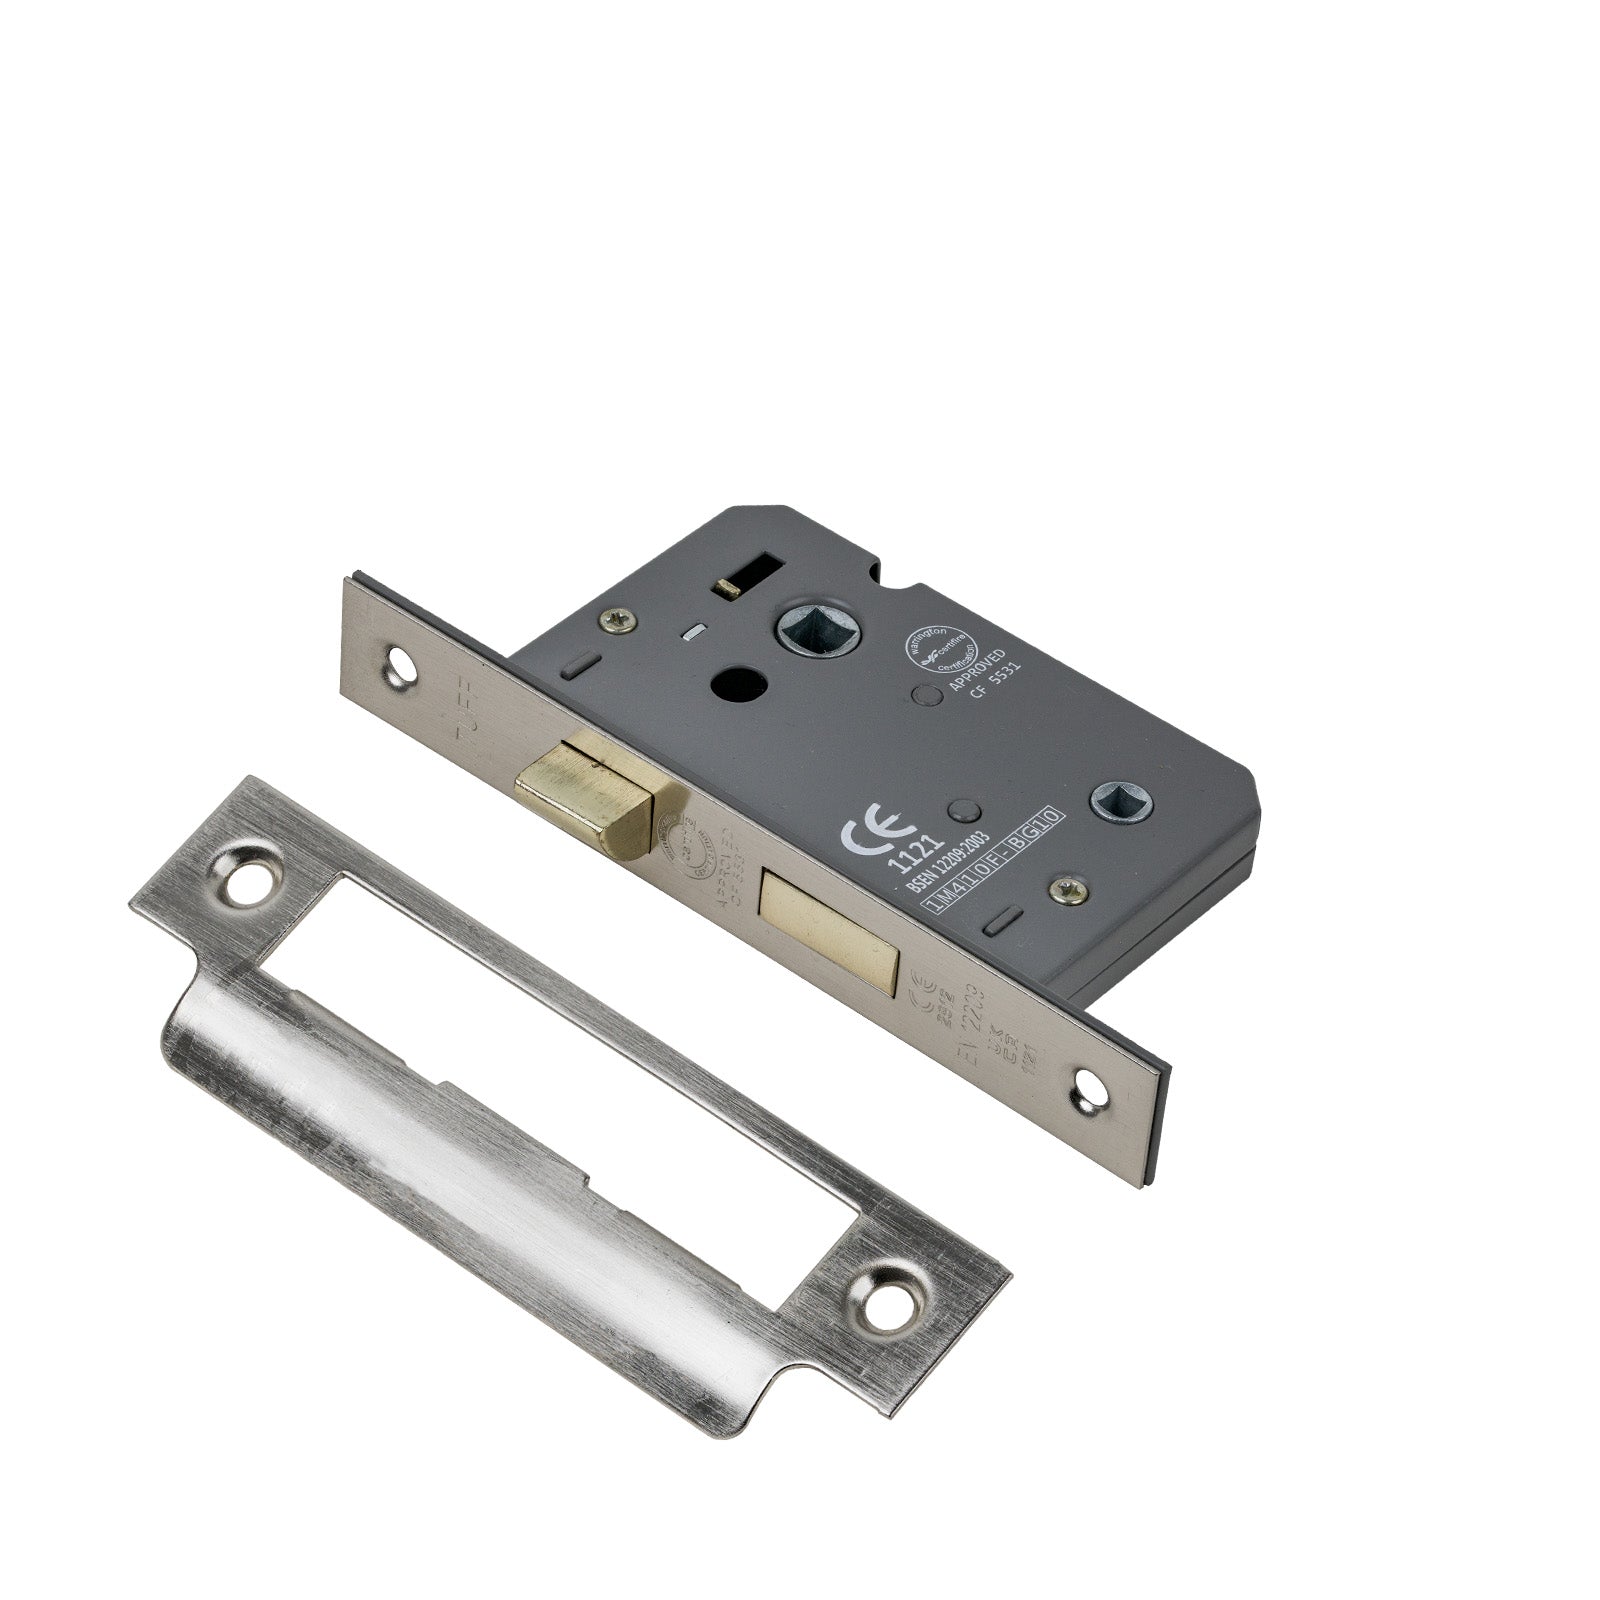 SHOW Bathroom Sash Lock - 2.5 Inch with Nickel finished forend and striker plate